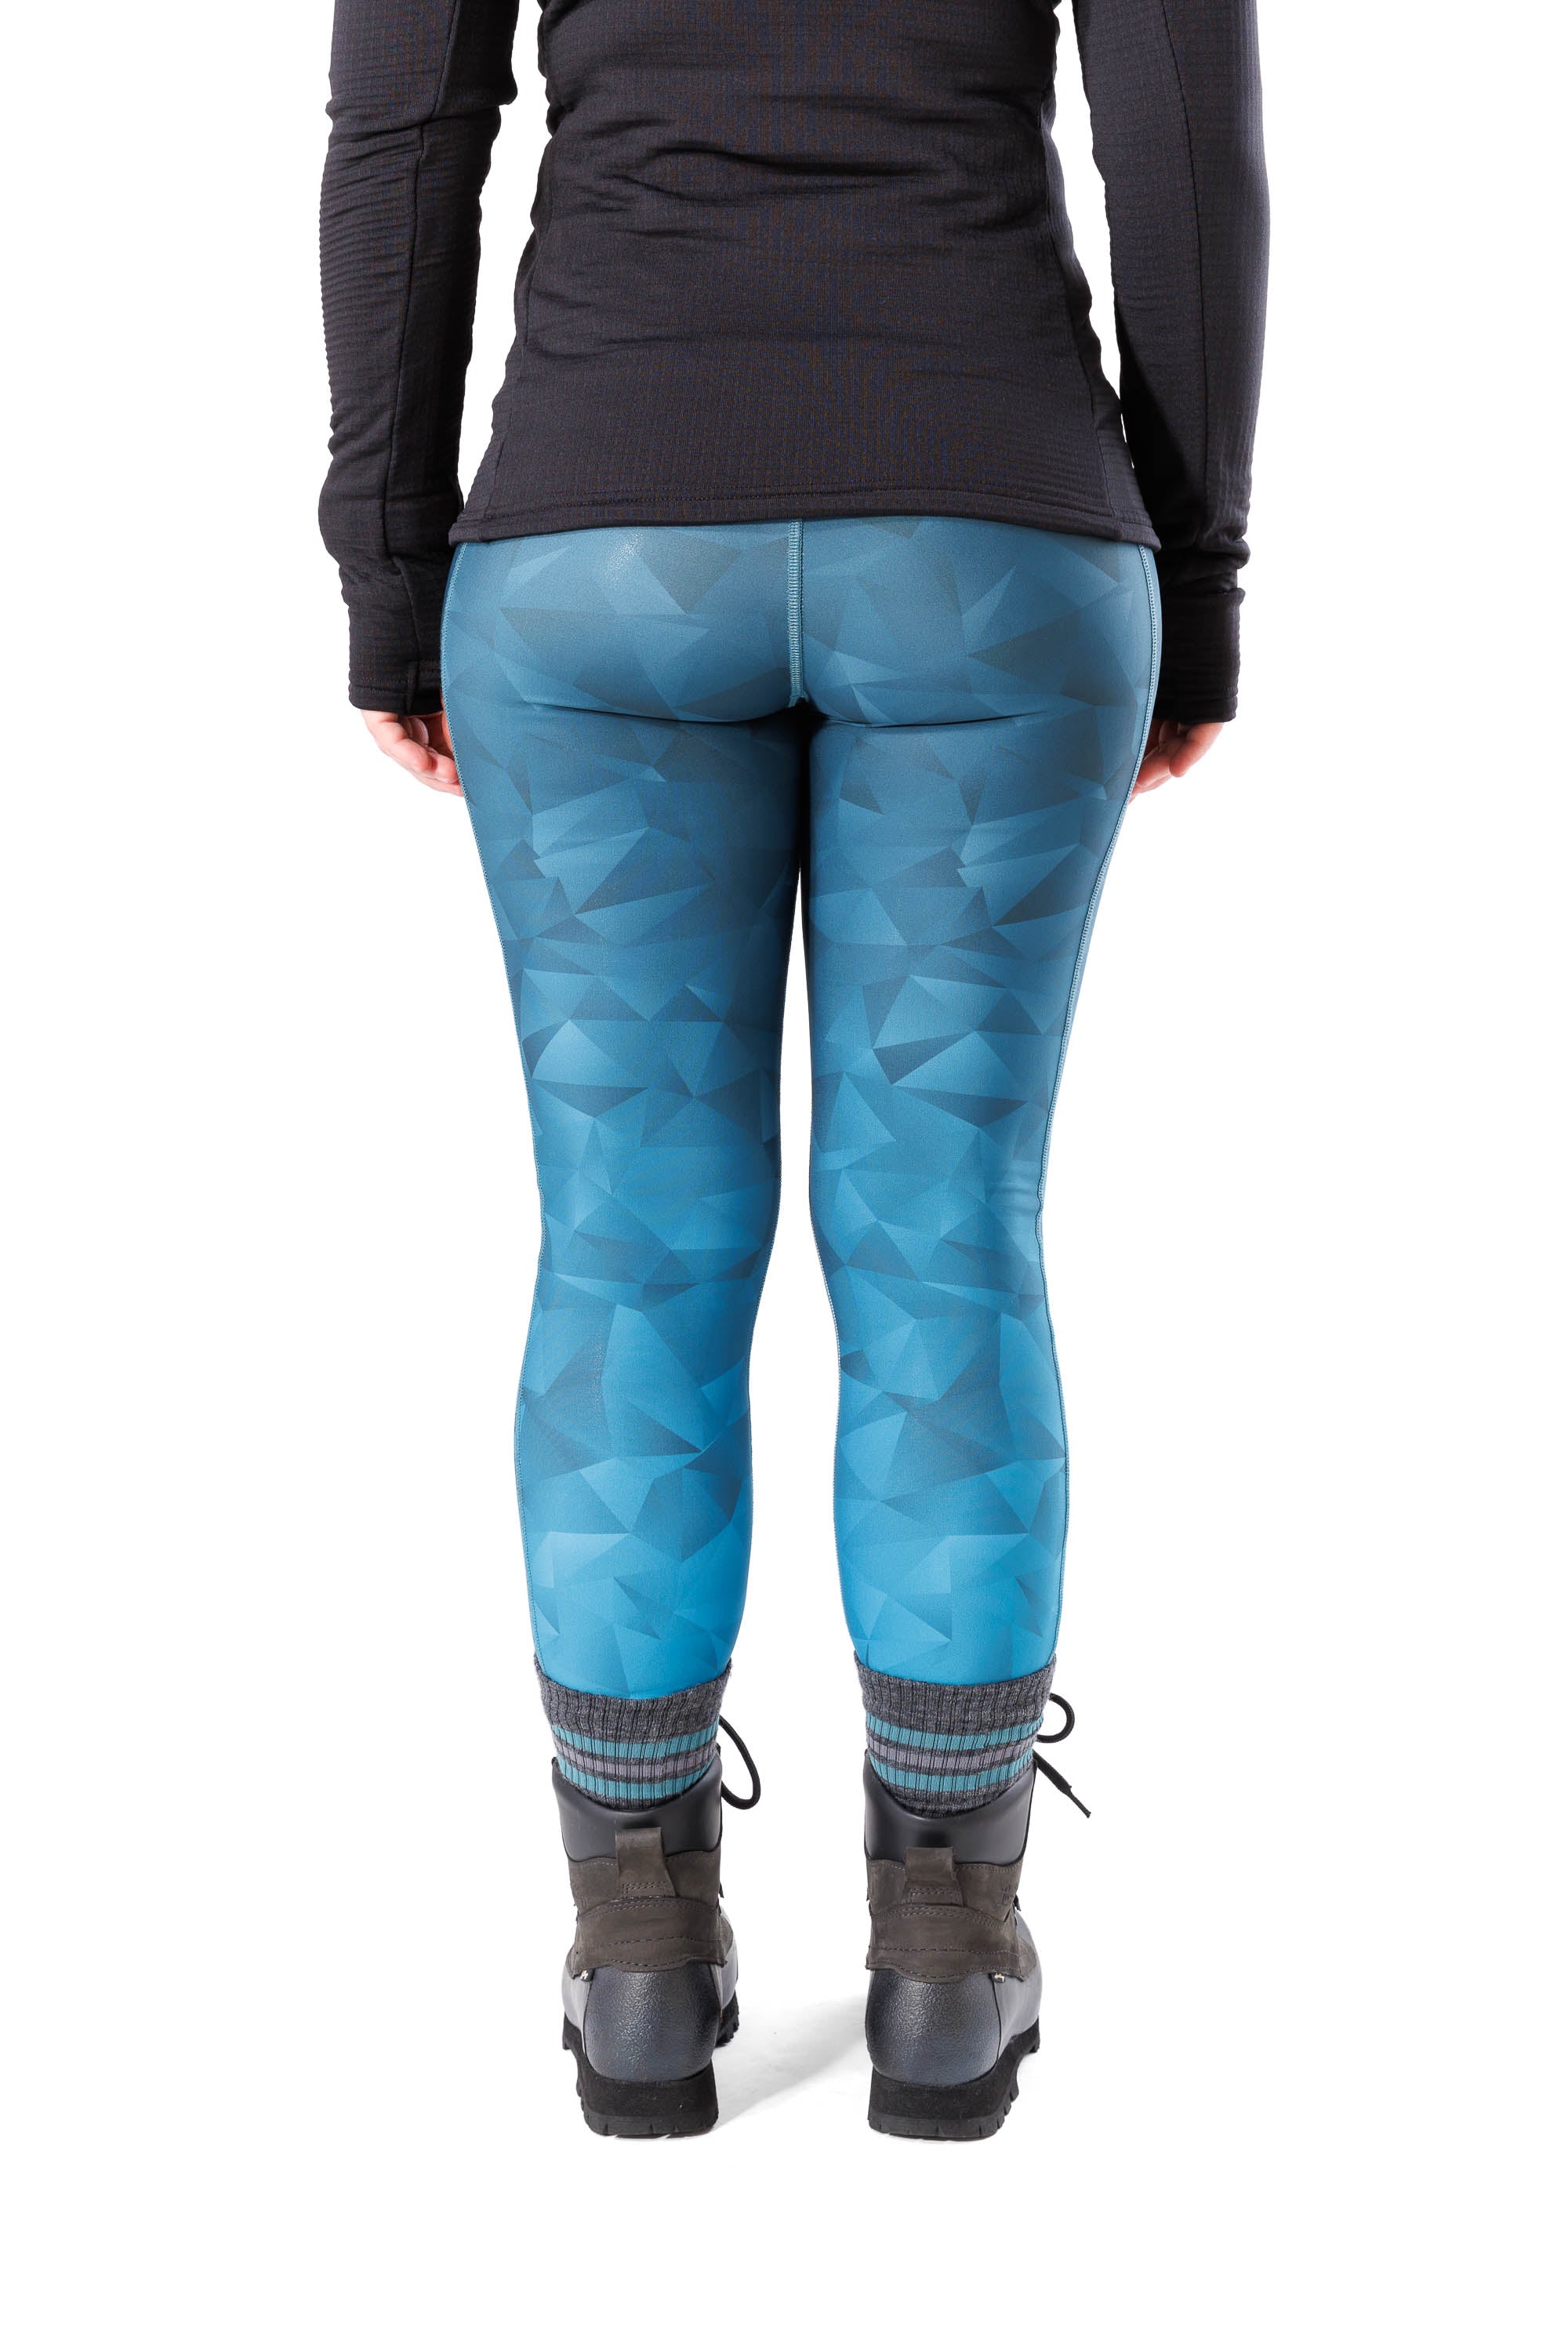 Winter Leggings Guide – Alpine Nation Outdoor Clothing